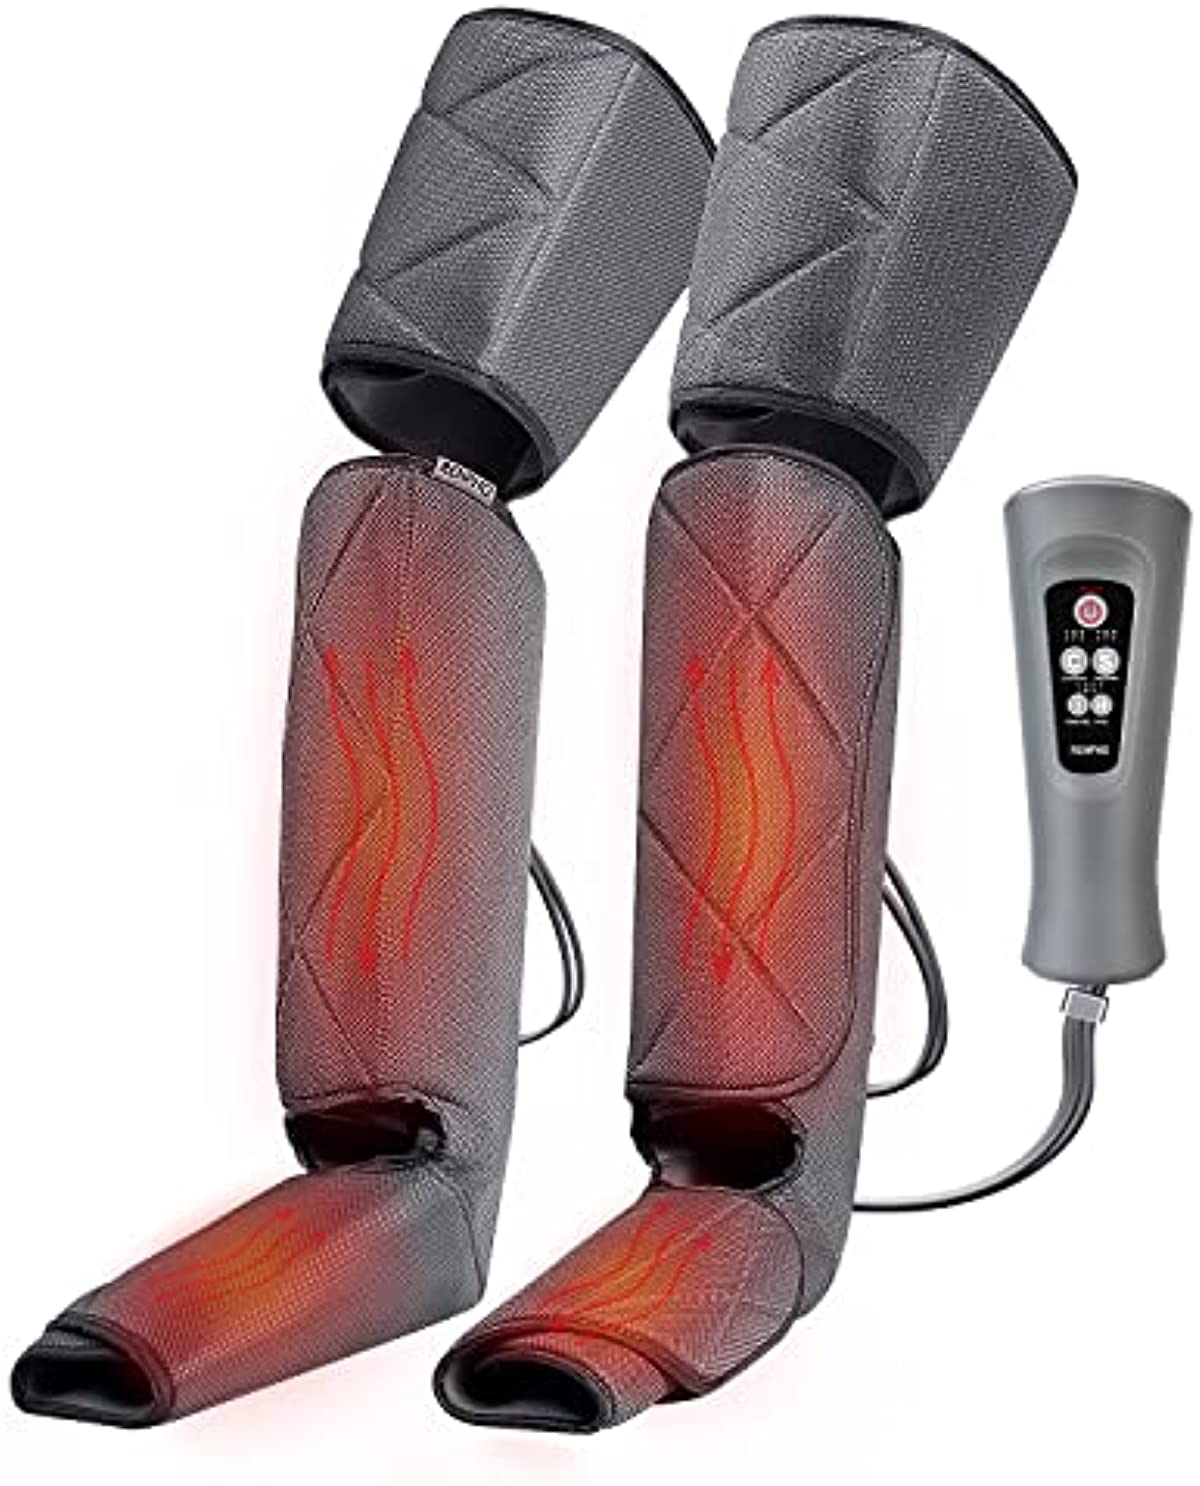 RENPHO Leg Massager with Heat for Circulation, Air Compression Calf Thigh Foot Massage, 2 Heat 6 Modes 3 Intensities for Pain Relief, Gifts for Mom Dad Mothers Gifts